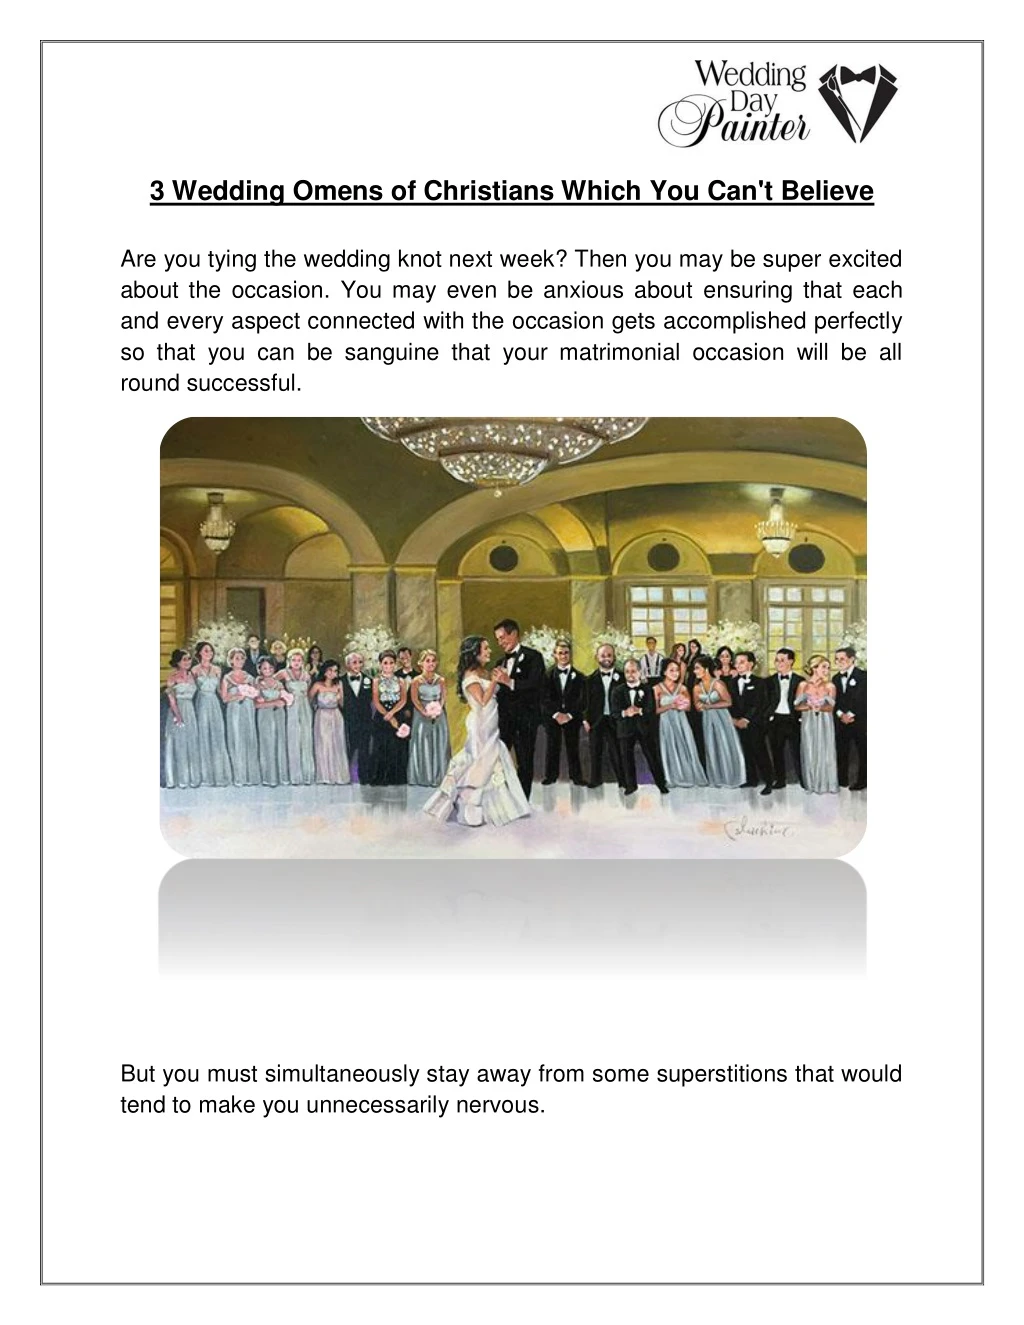 3 wedding omens of christians which